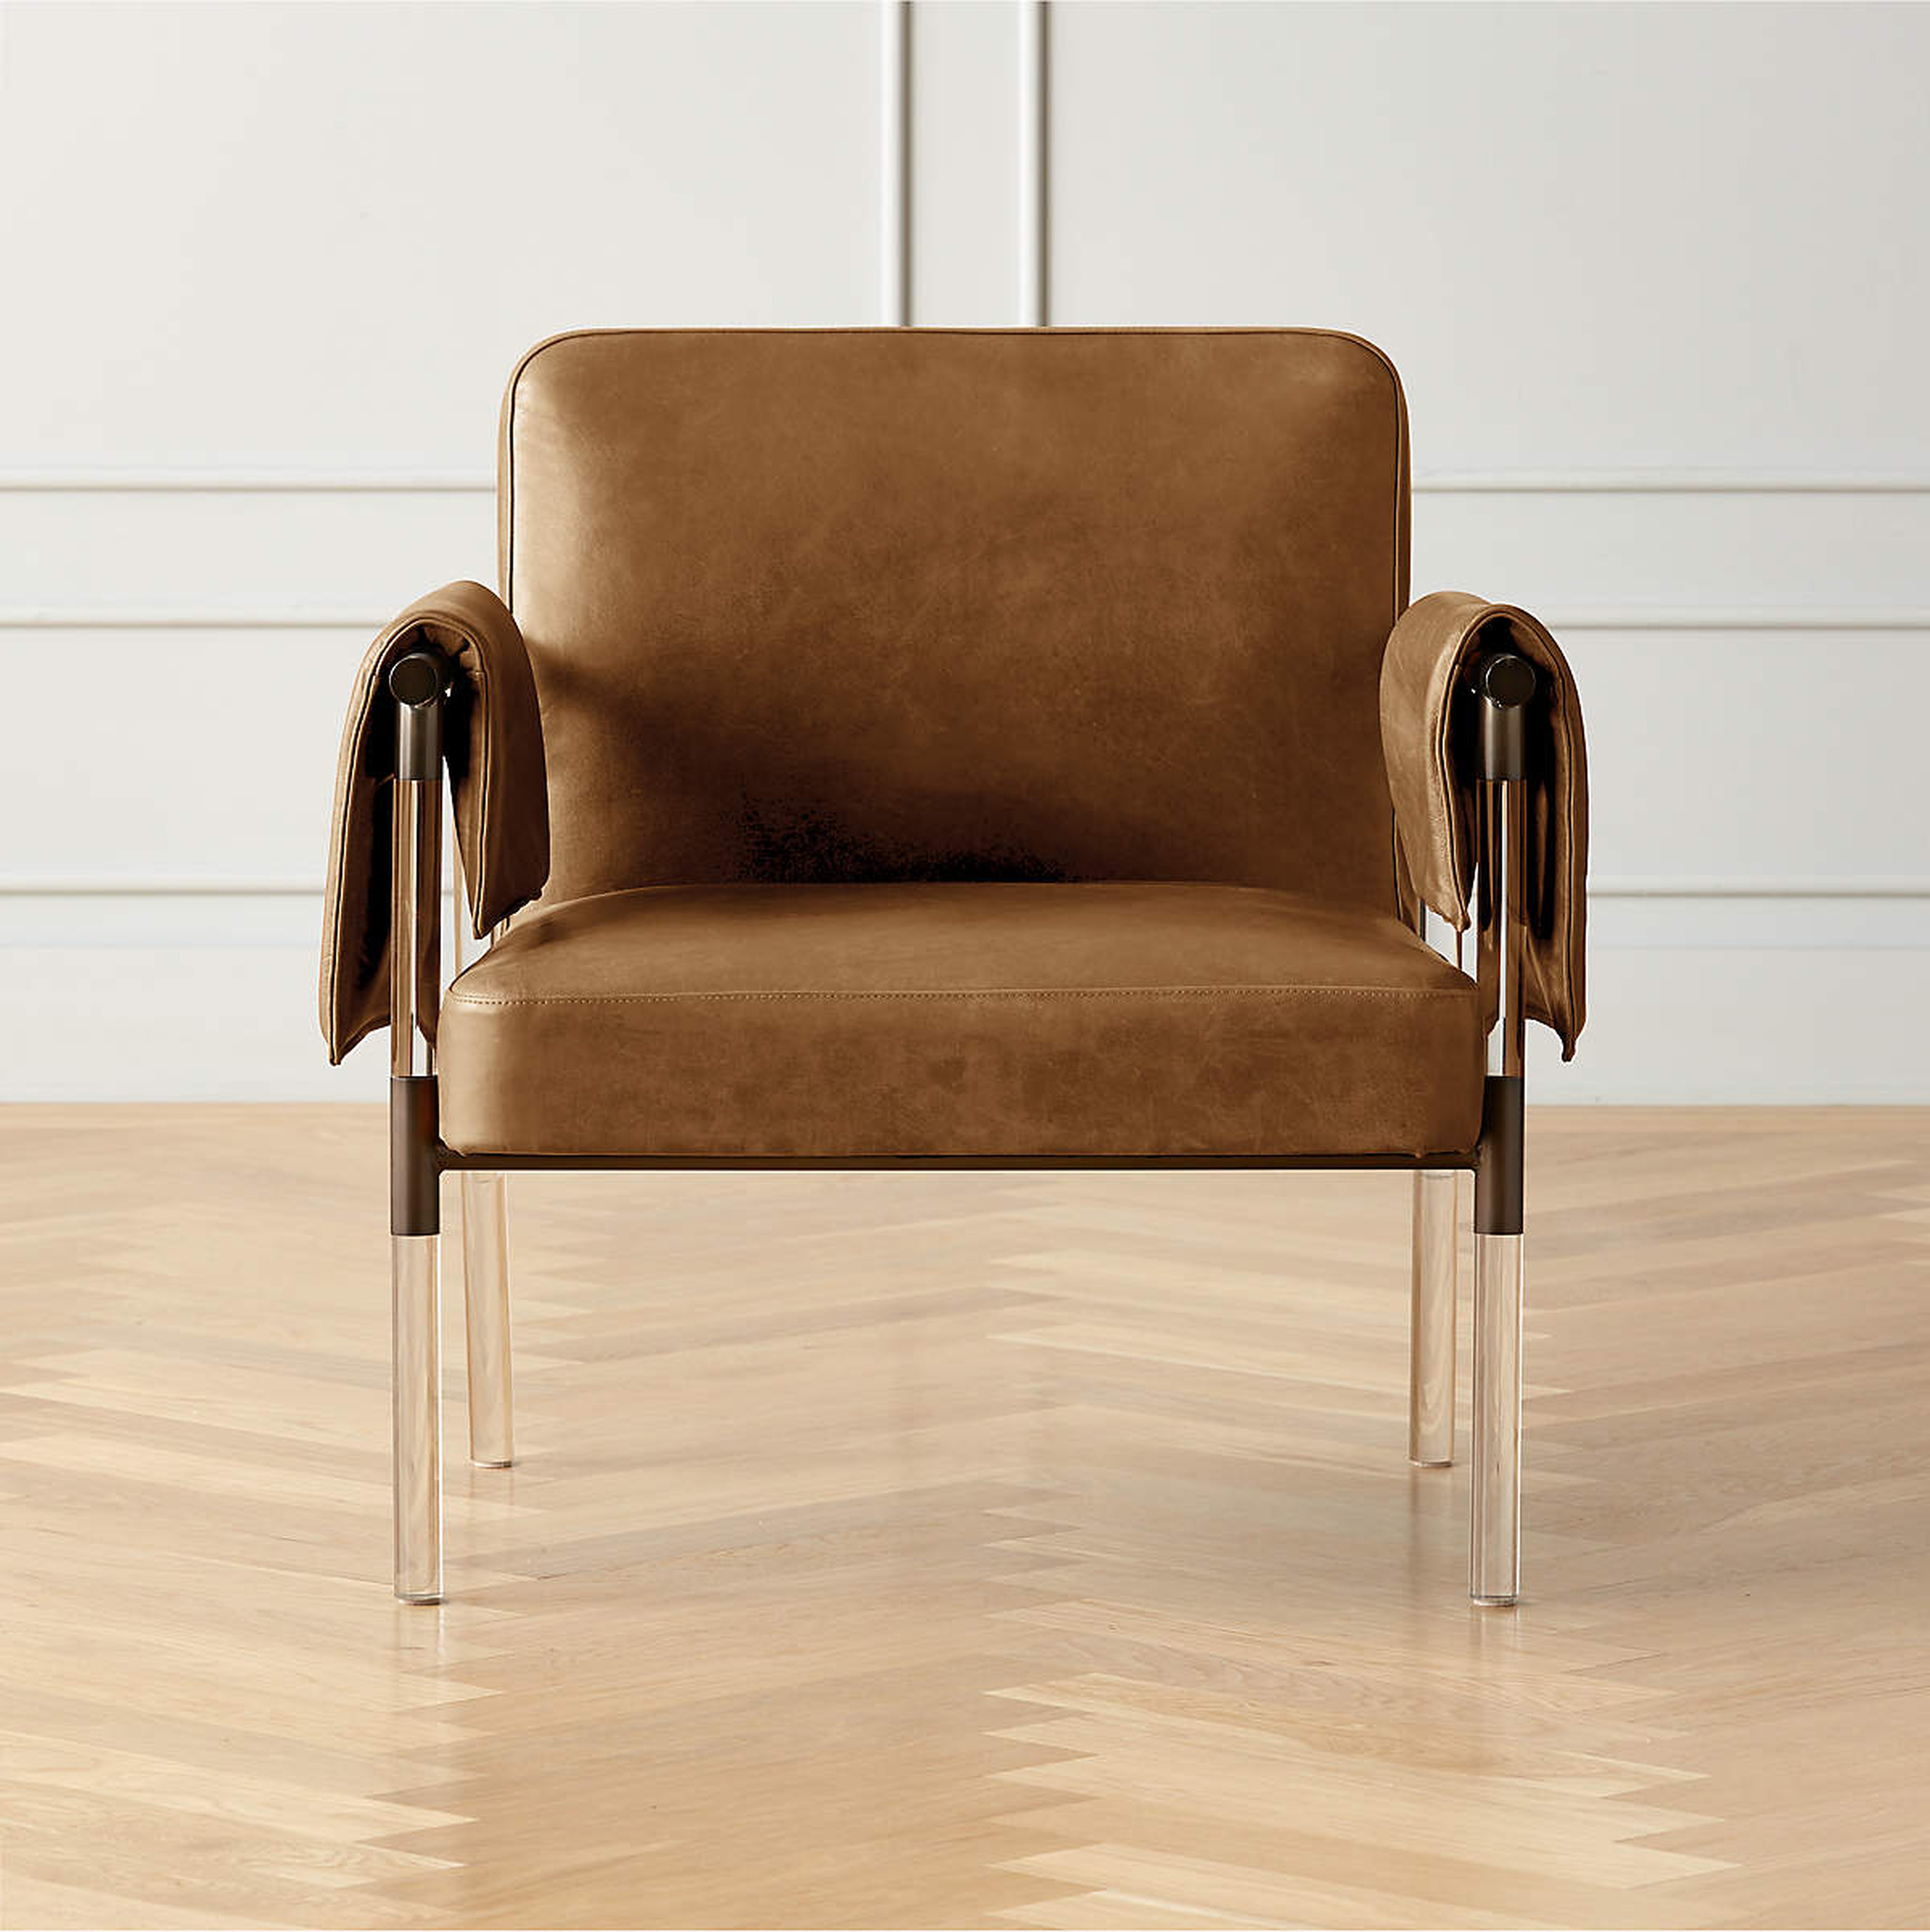 ATLAS ACRYLIC AND TOBACCO LEATHER CHAIR - CB2